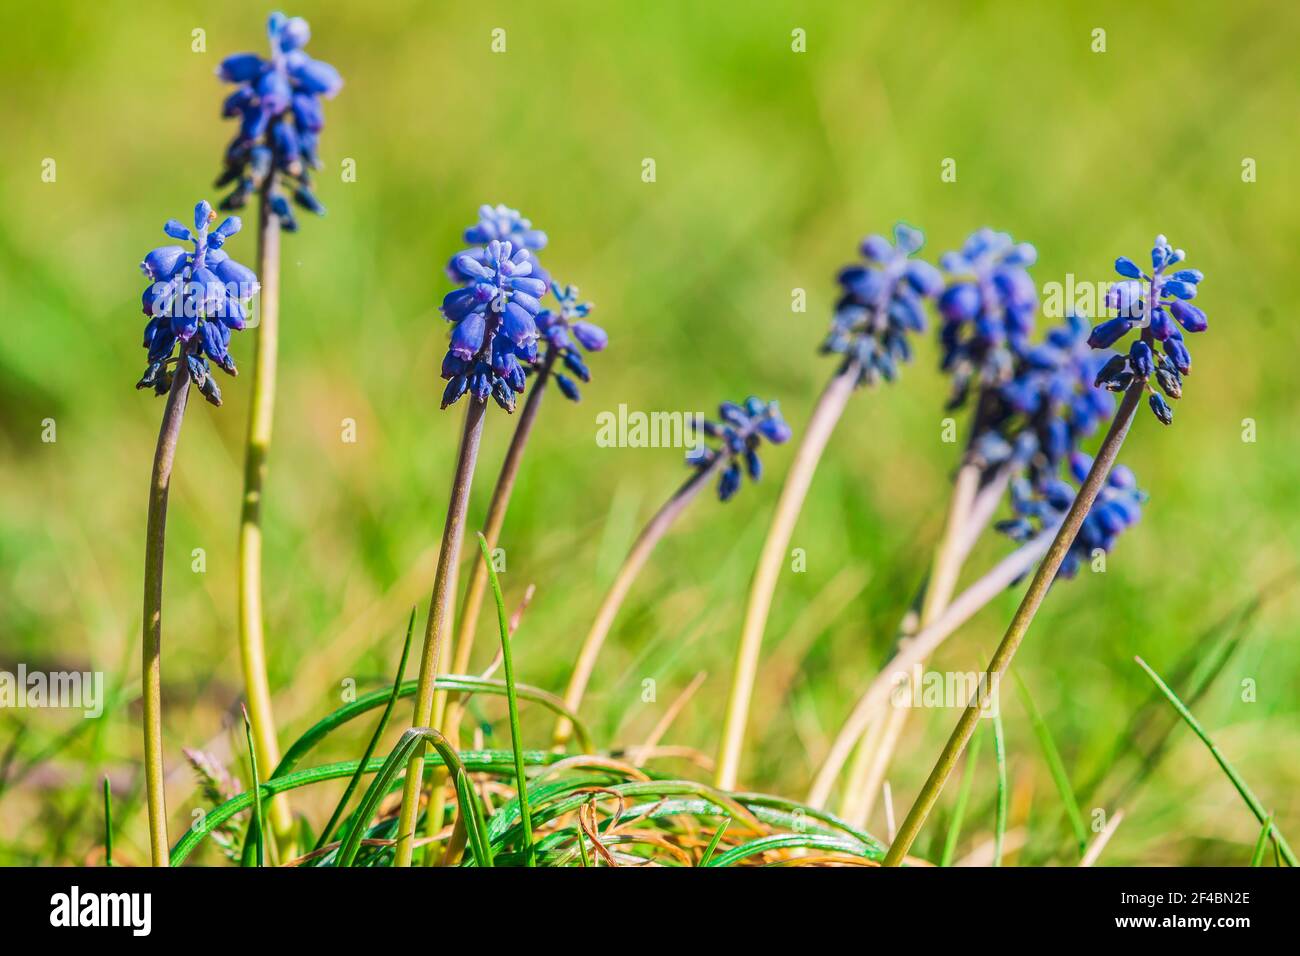 Purple flowers from a meadow bloomer. Wildflower vineyard grape hyacinth Muscari neglectum onion geophyte in spring sunshine. Flower with green stem Stock Photo